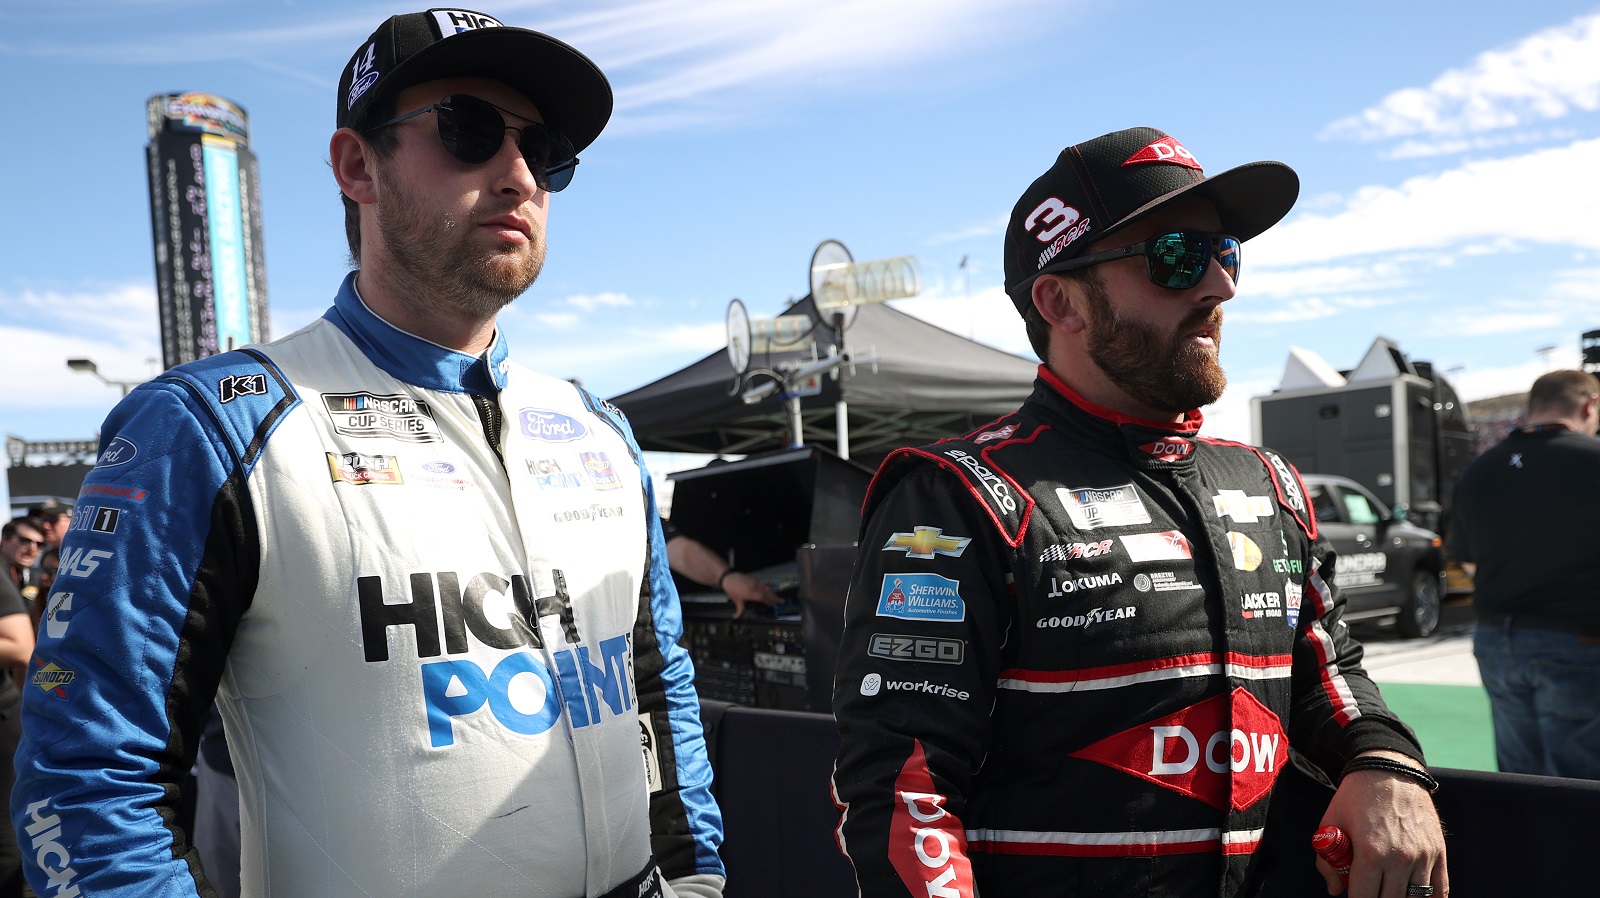 Chase Briscoe and Austin Dillon wait during pre-race ceremonies for the NASCAR Cup Series Championship at Phoenix Raceway on Nov. 7, 2021. | Chris Graythen/Getty Images